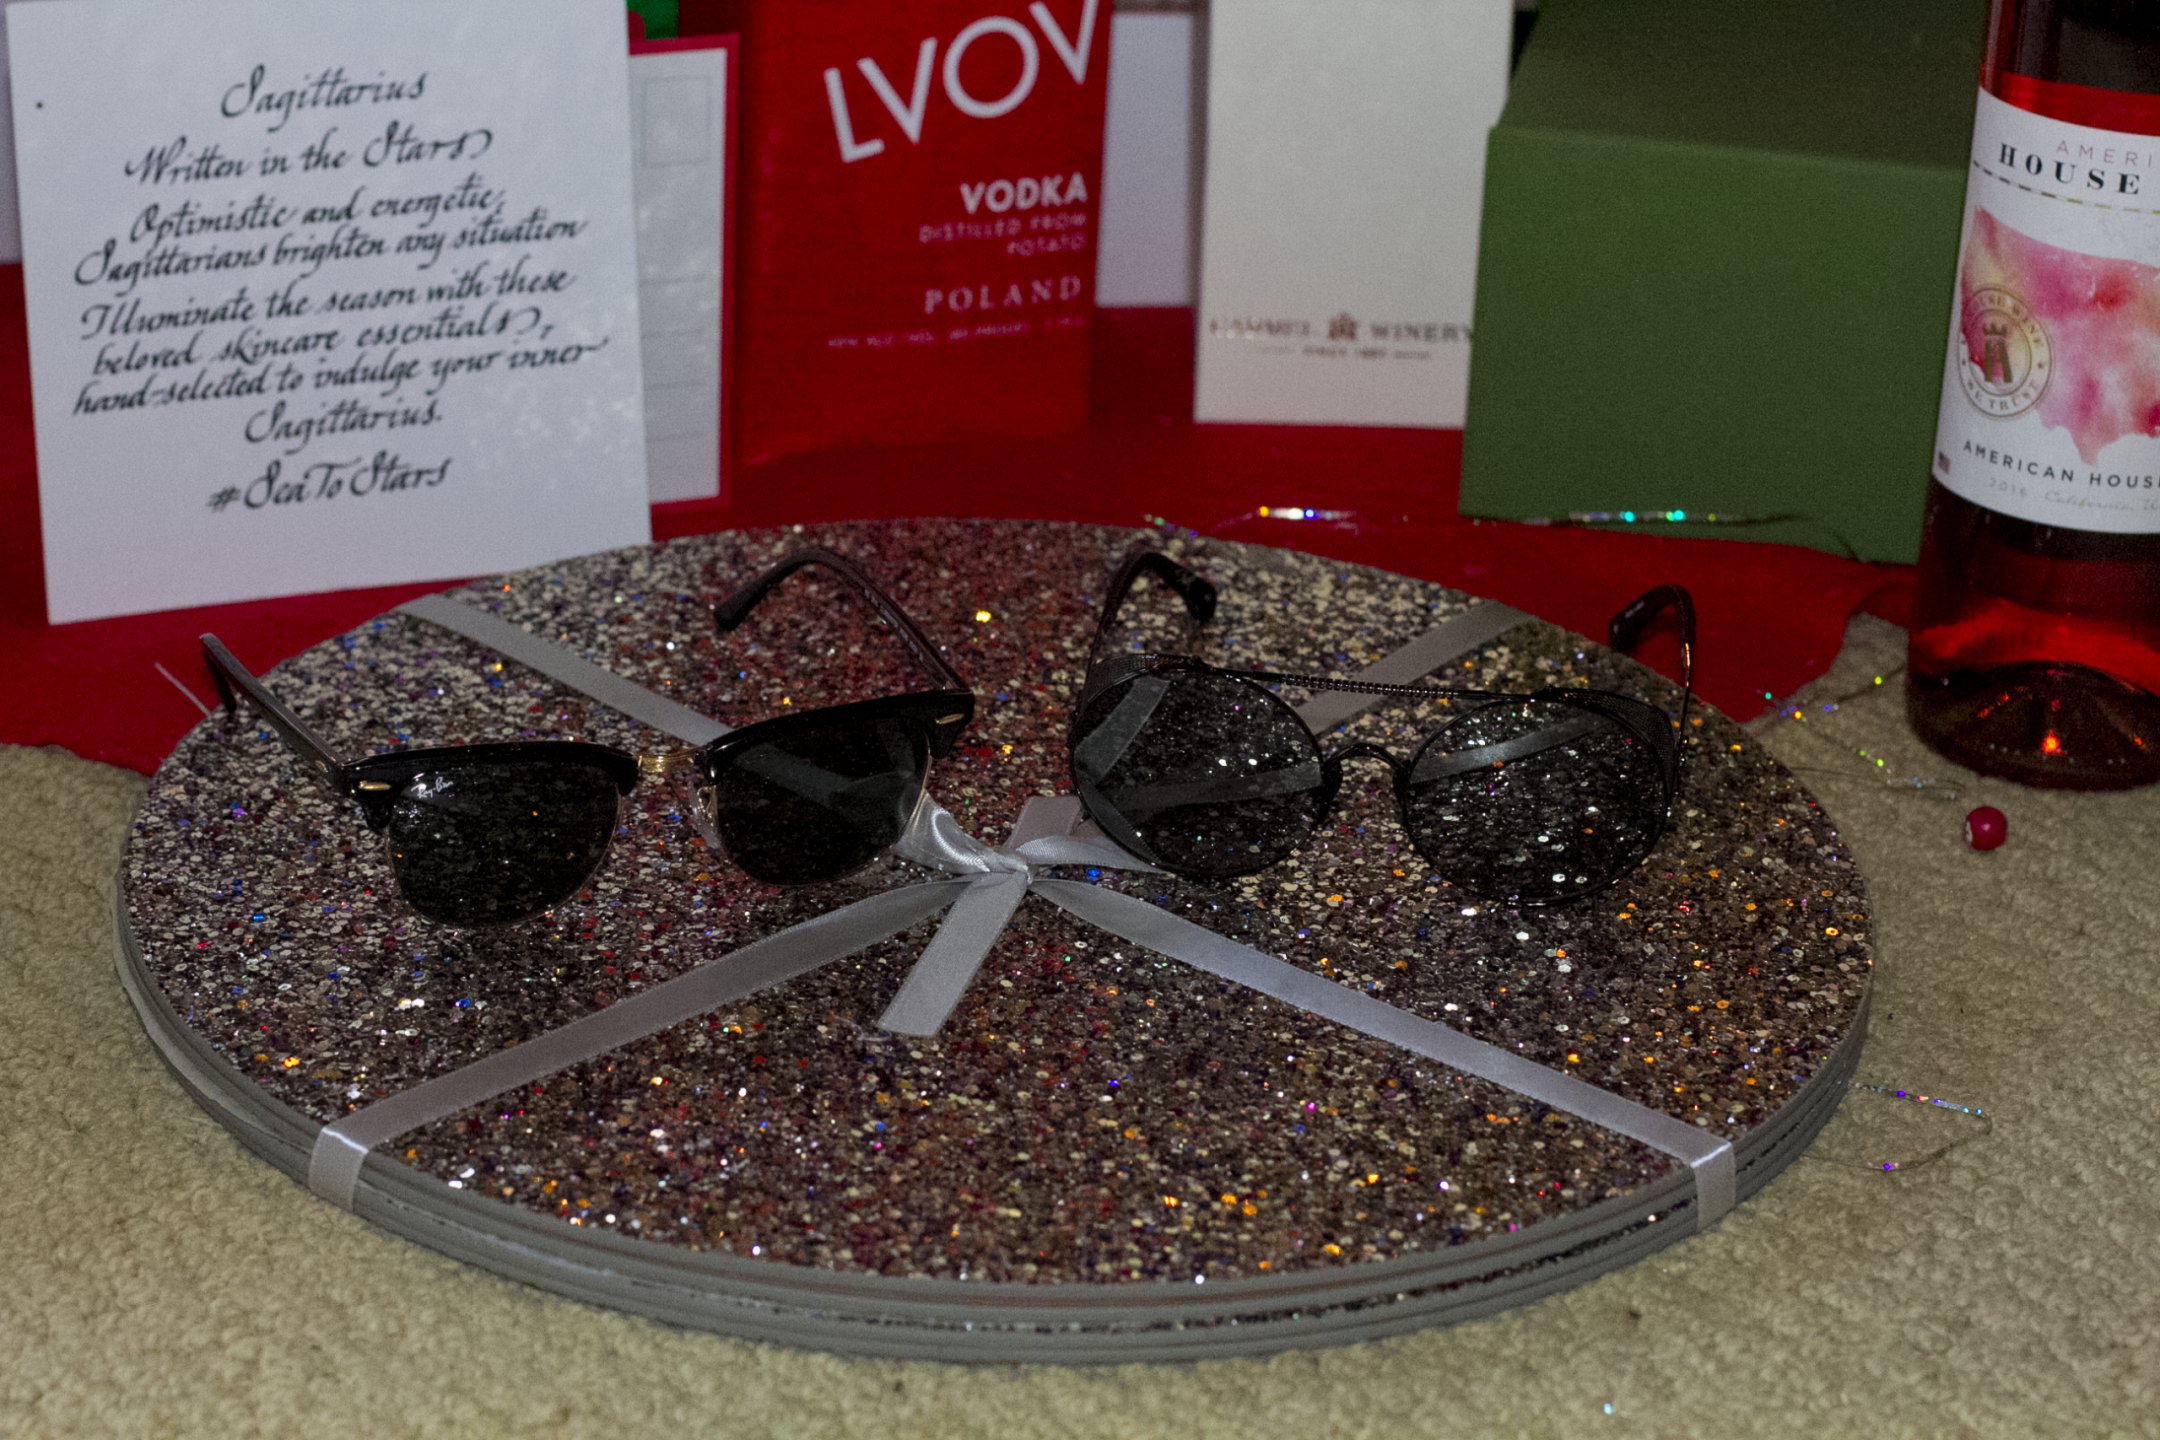 Ray Ban vs Philippe V sunglasses holiday gift guide favorites